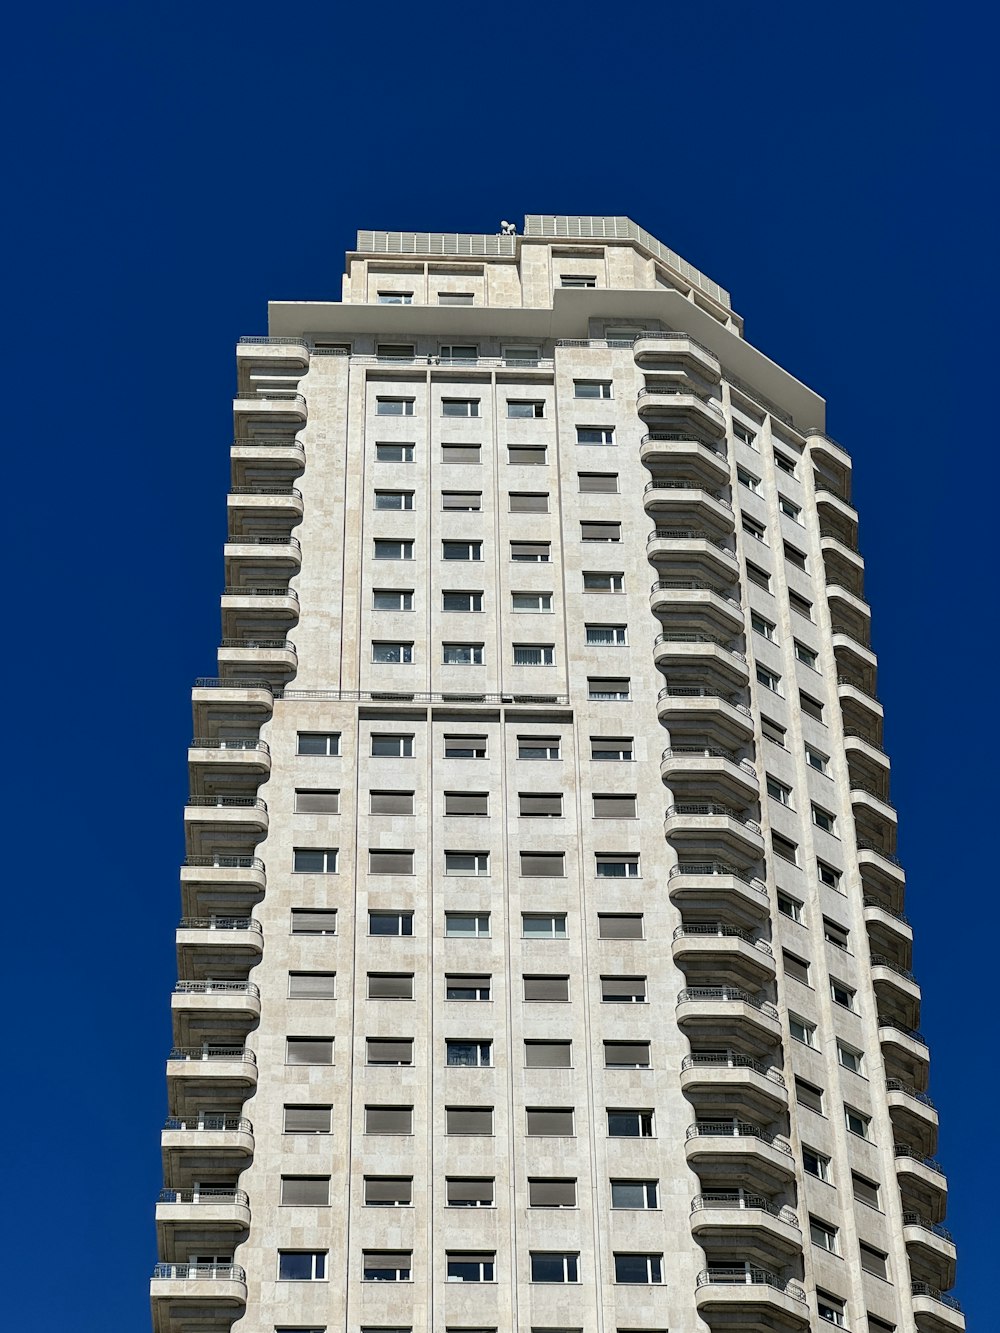 a tall white building with windows and balconies